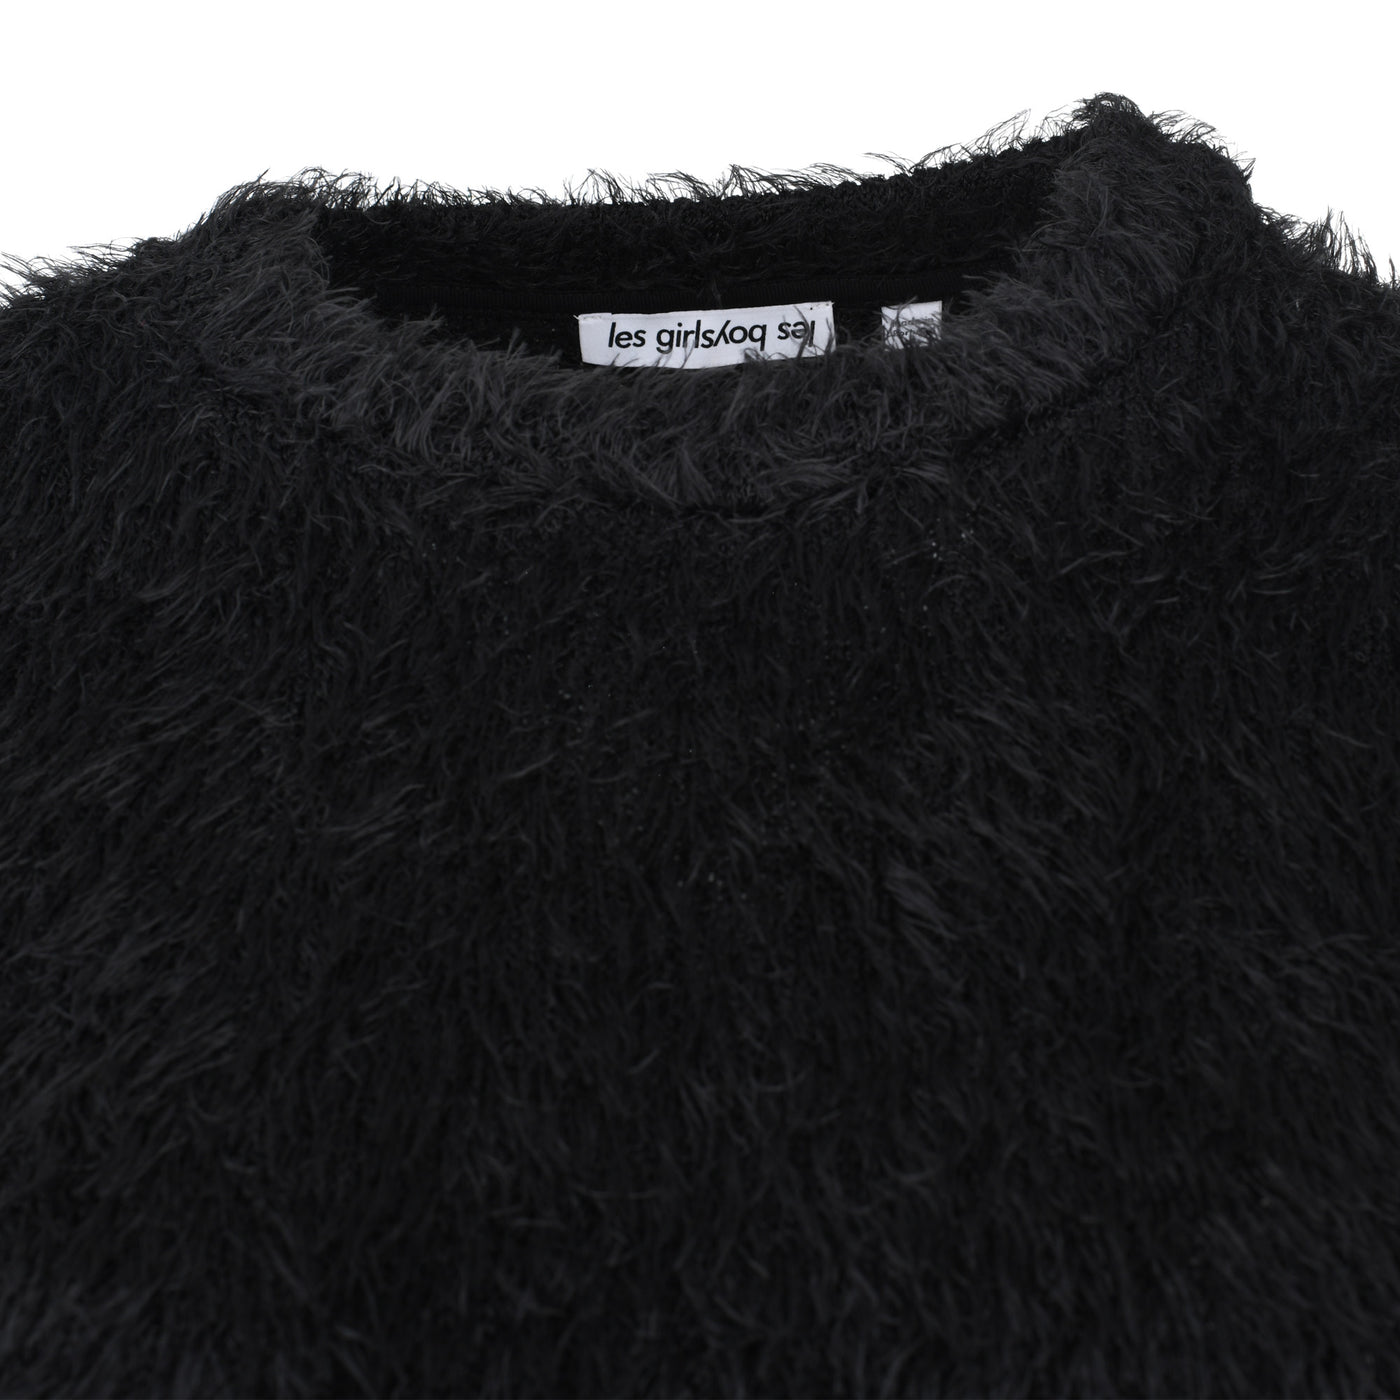 Fluffy Fluffy Cropped Crew Neck